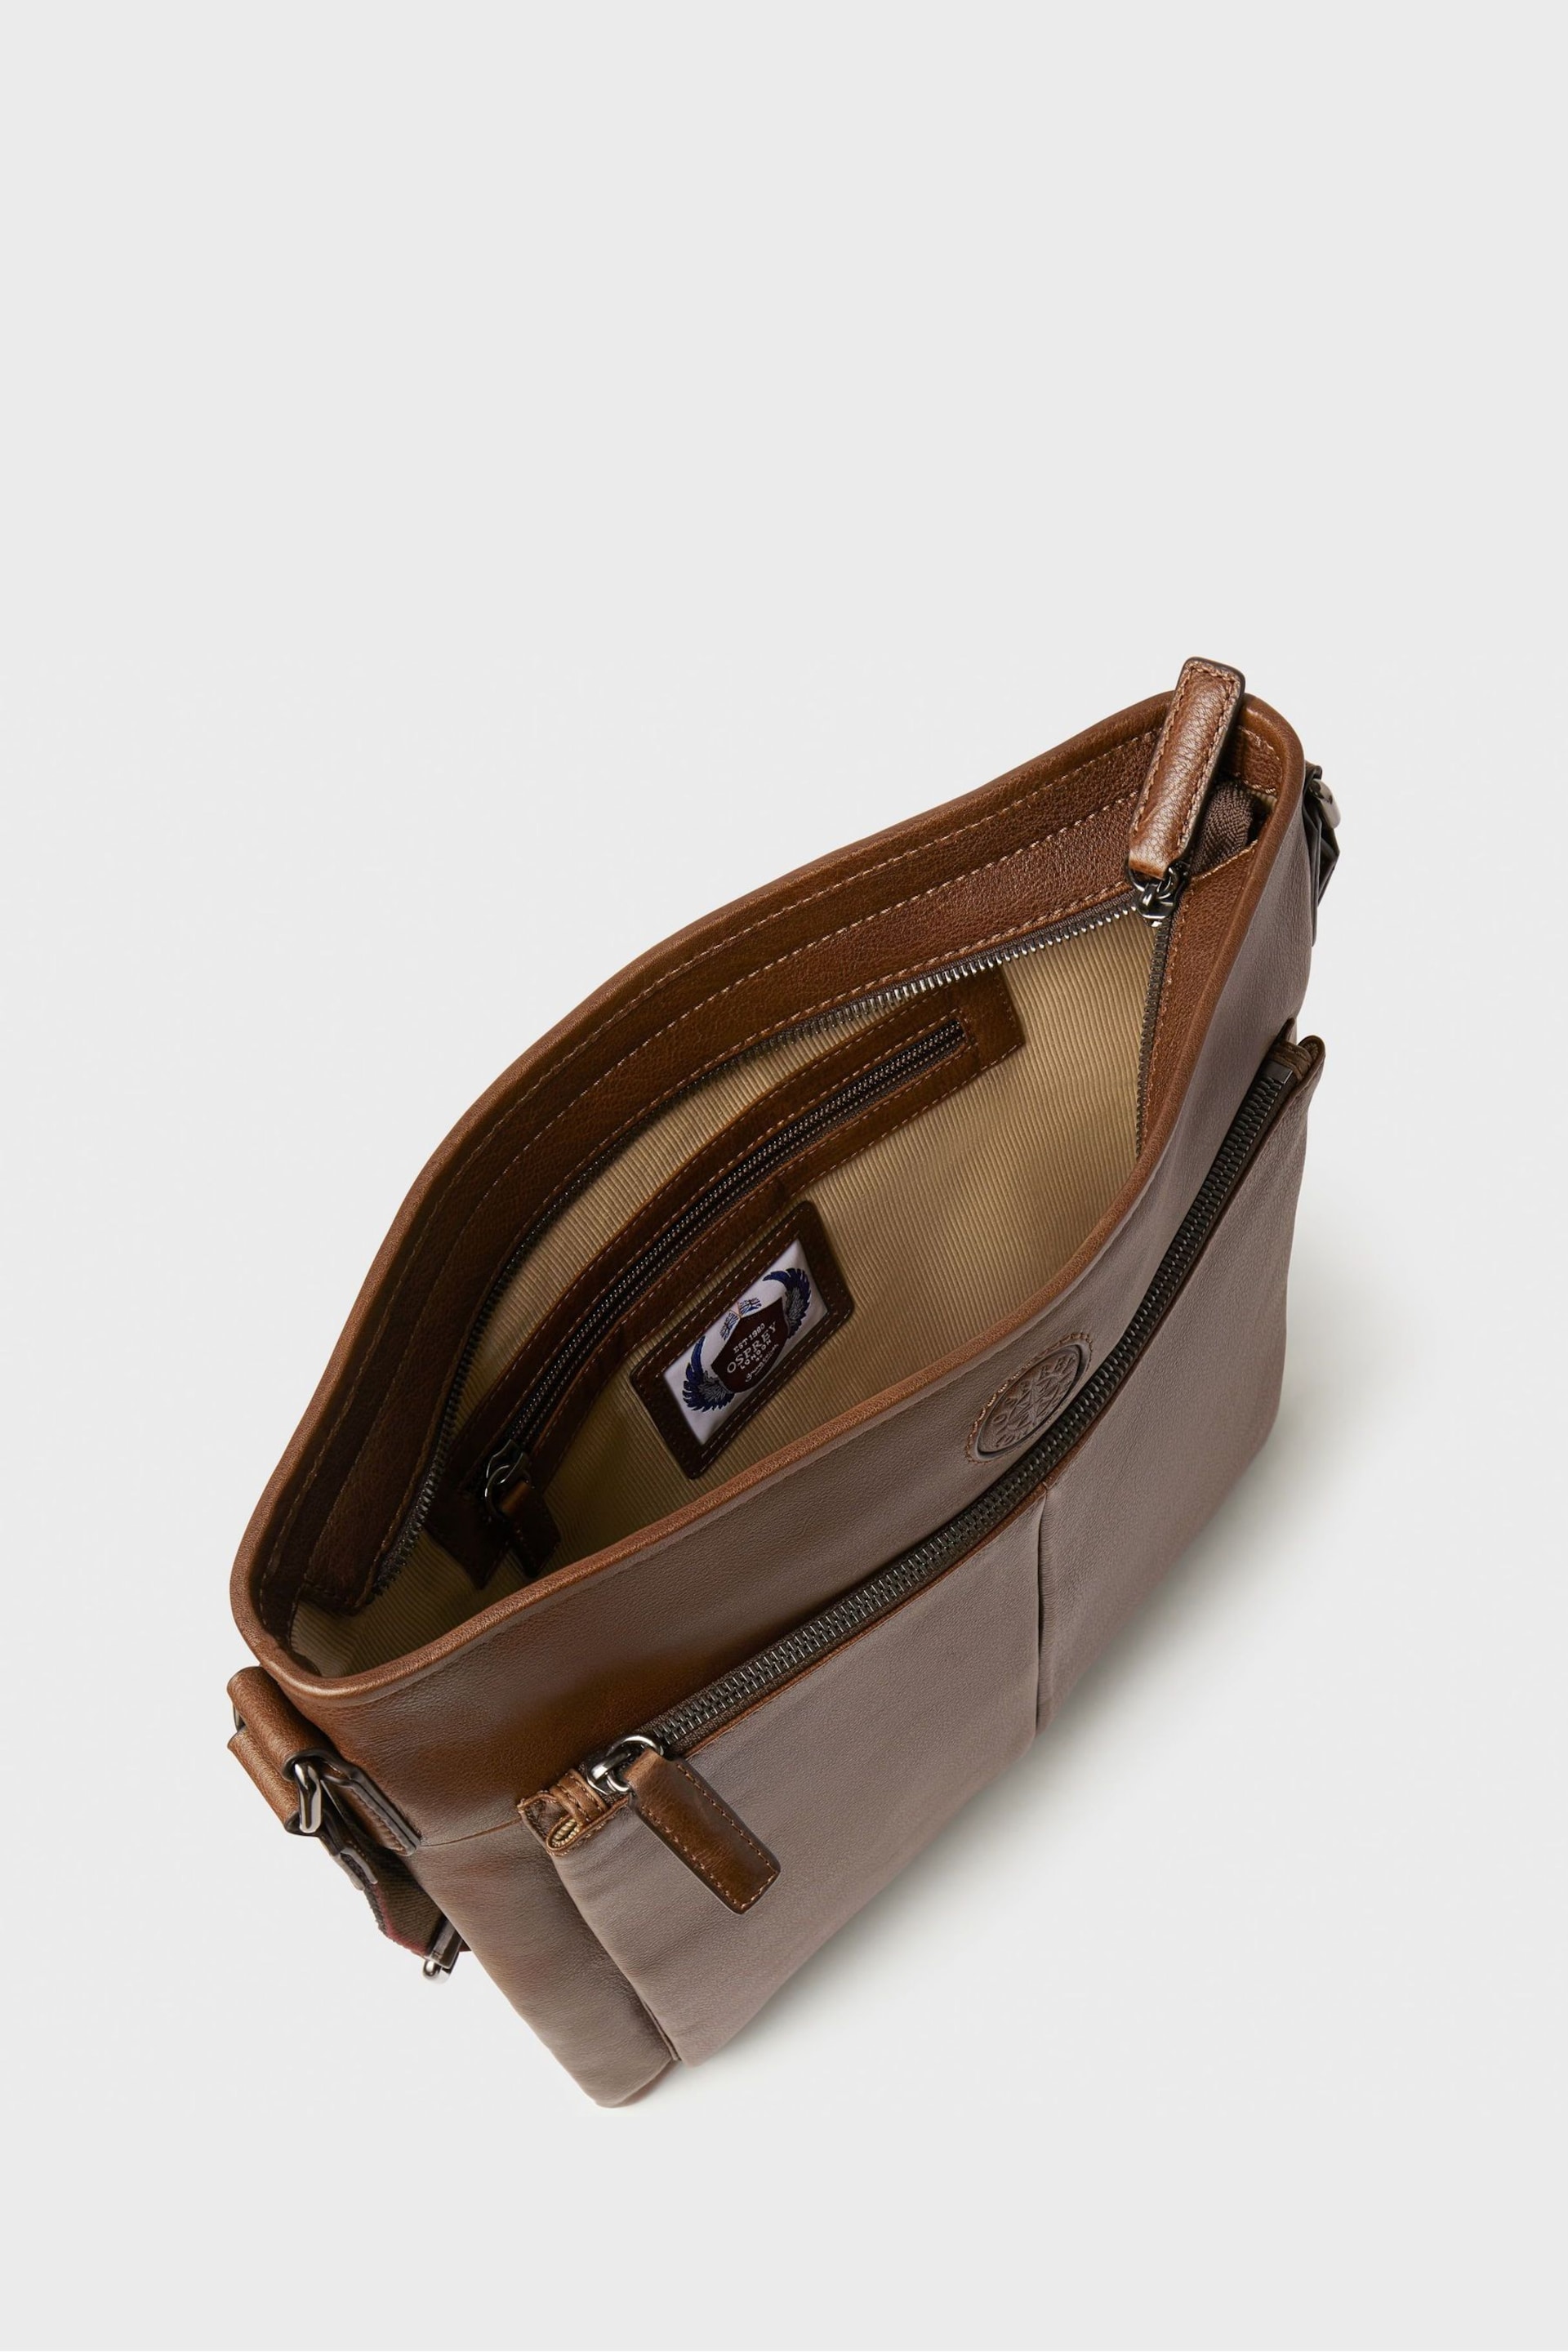 Osprey London The Compass Leather Cross-Body Brown Bag - Image 4 of 5